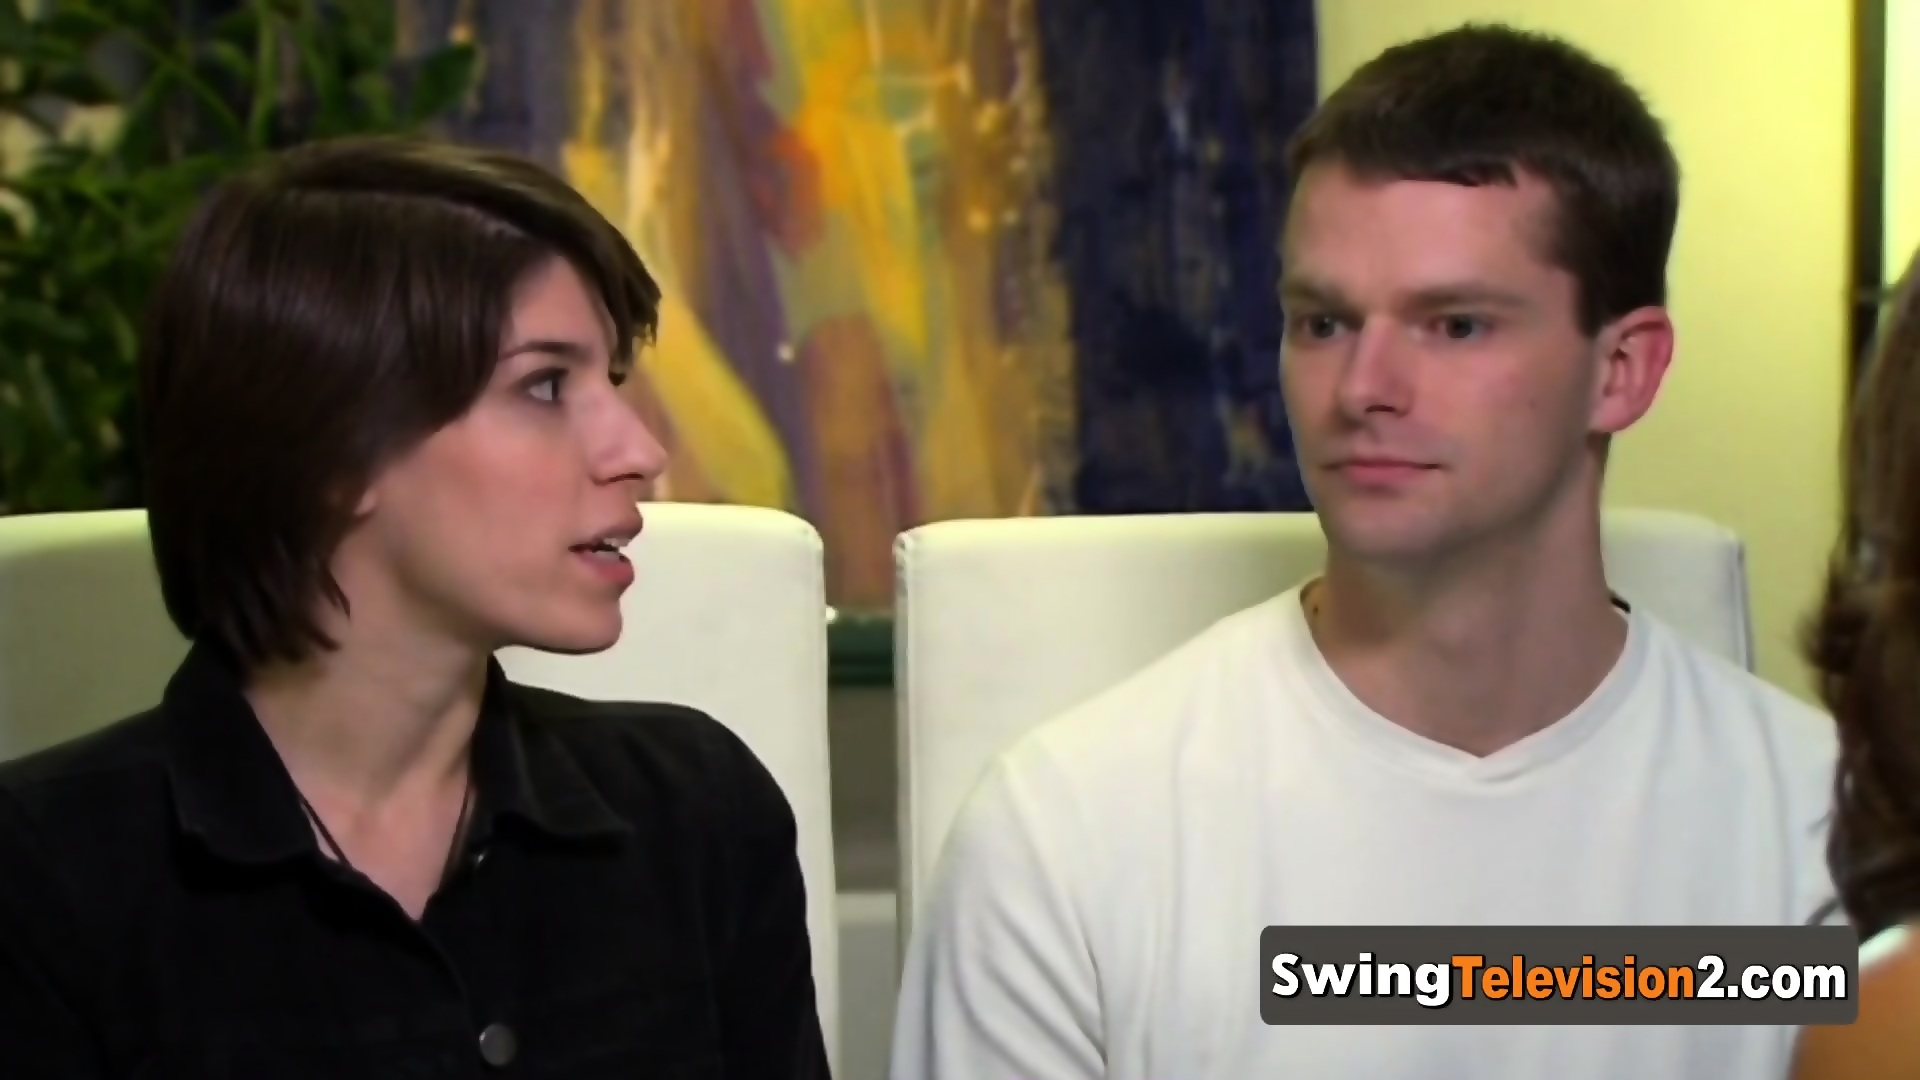 Amateur Swinger Couples Discuss About Rules And Sexual Fantasies Before Entering The Swing House.